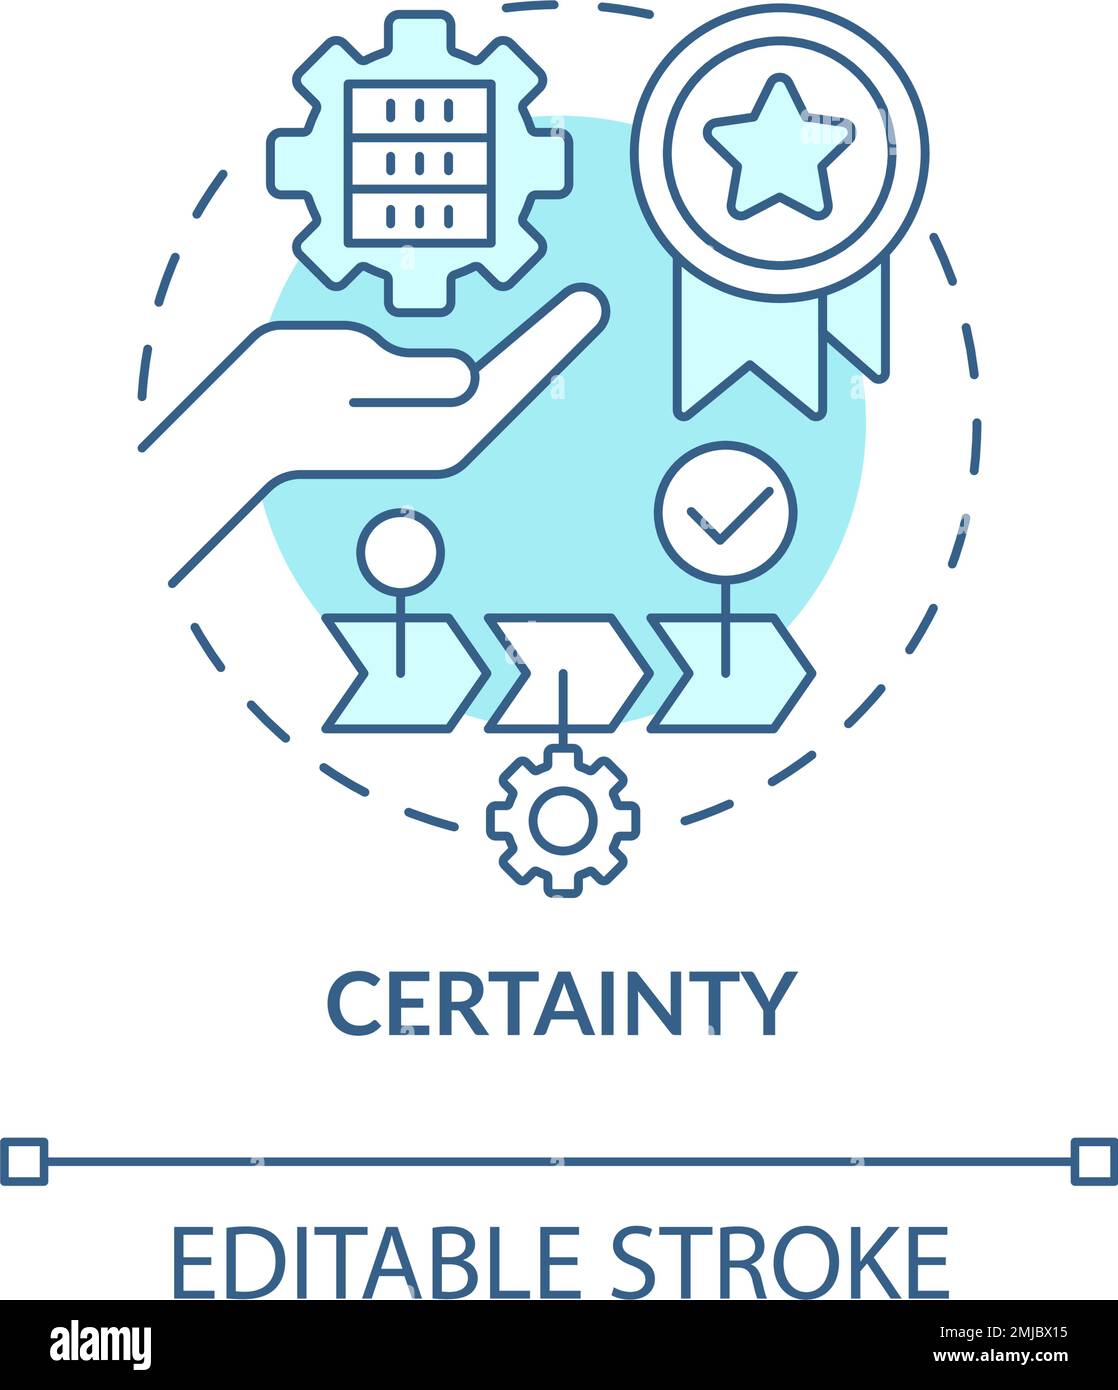 Certainty turquoise concept icon Stock Vector